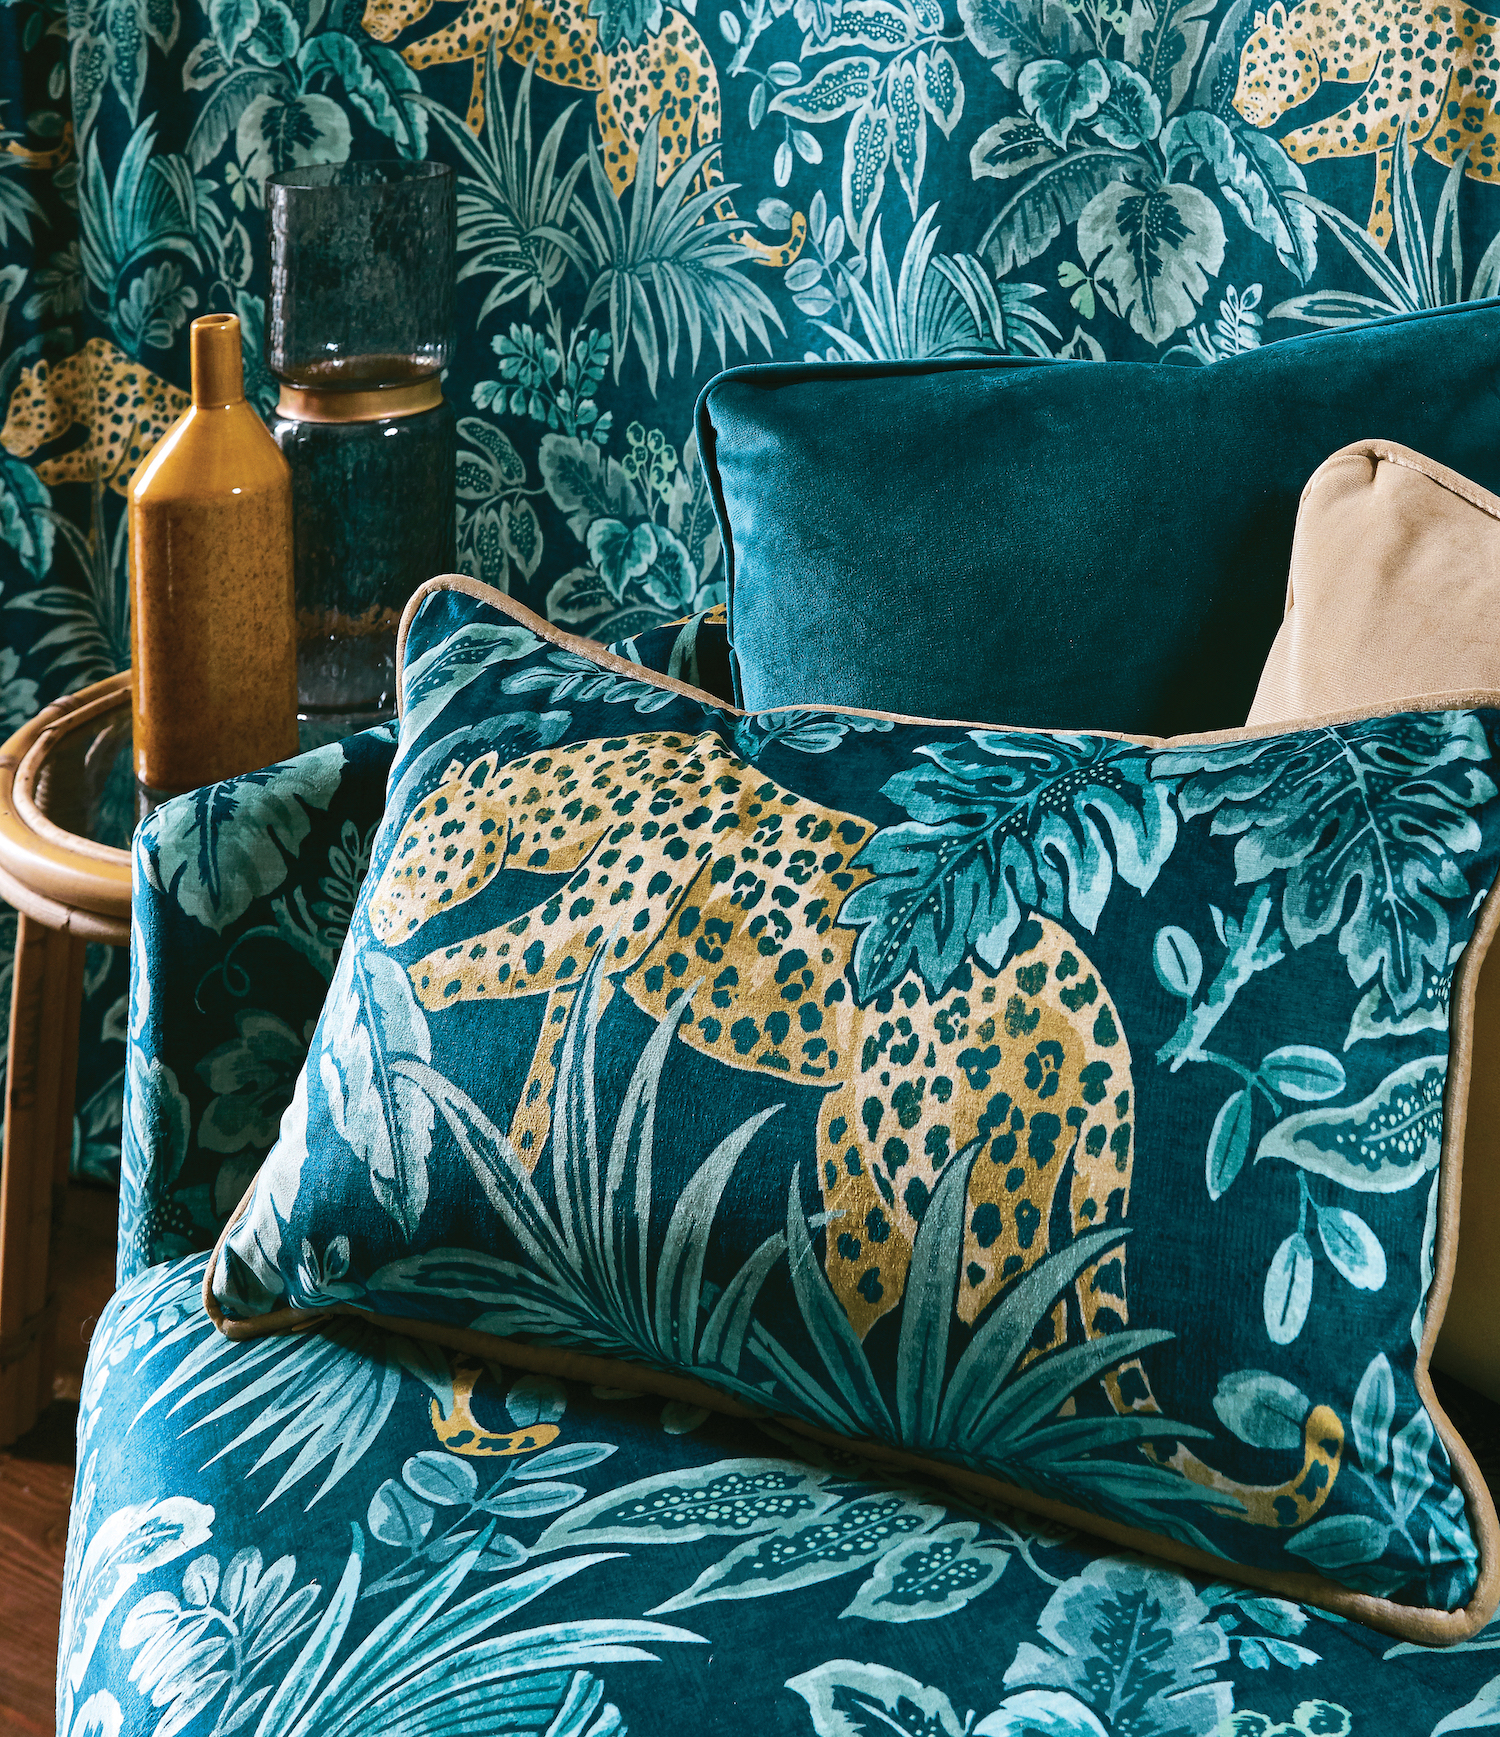 A photo of fabrics and cushions from the new collection from Prestigious Textiles.